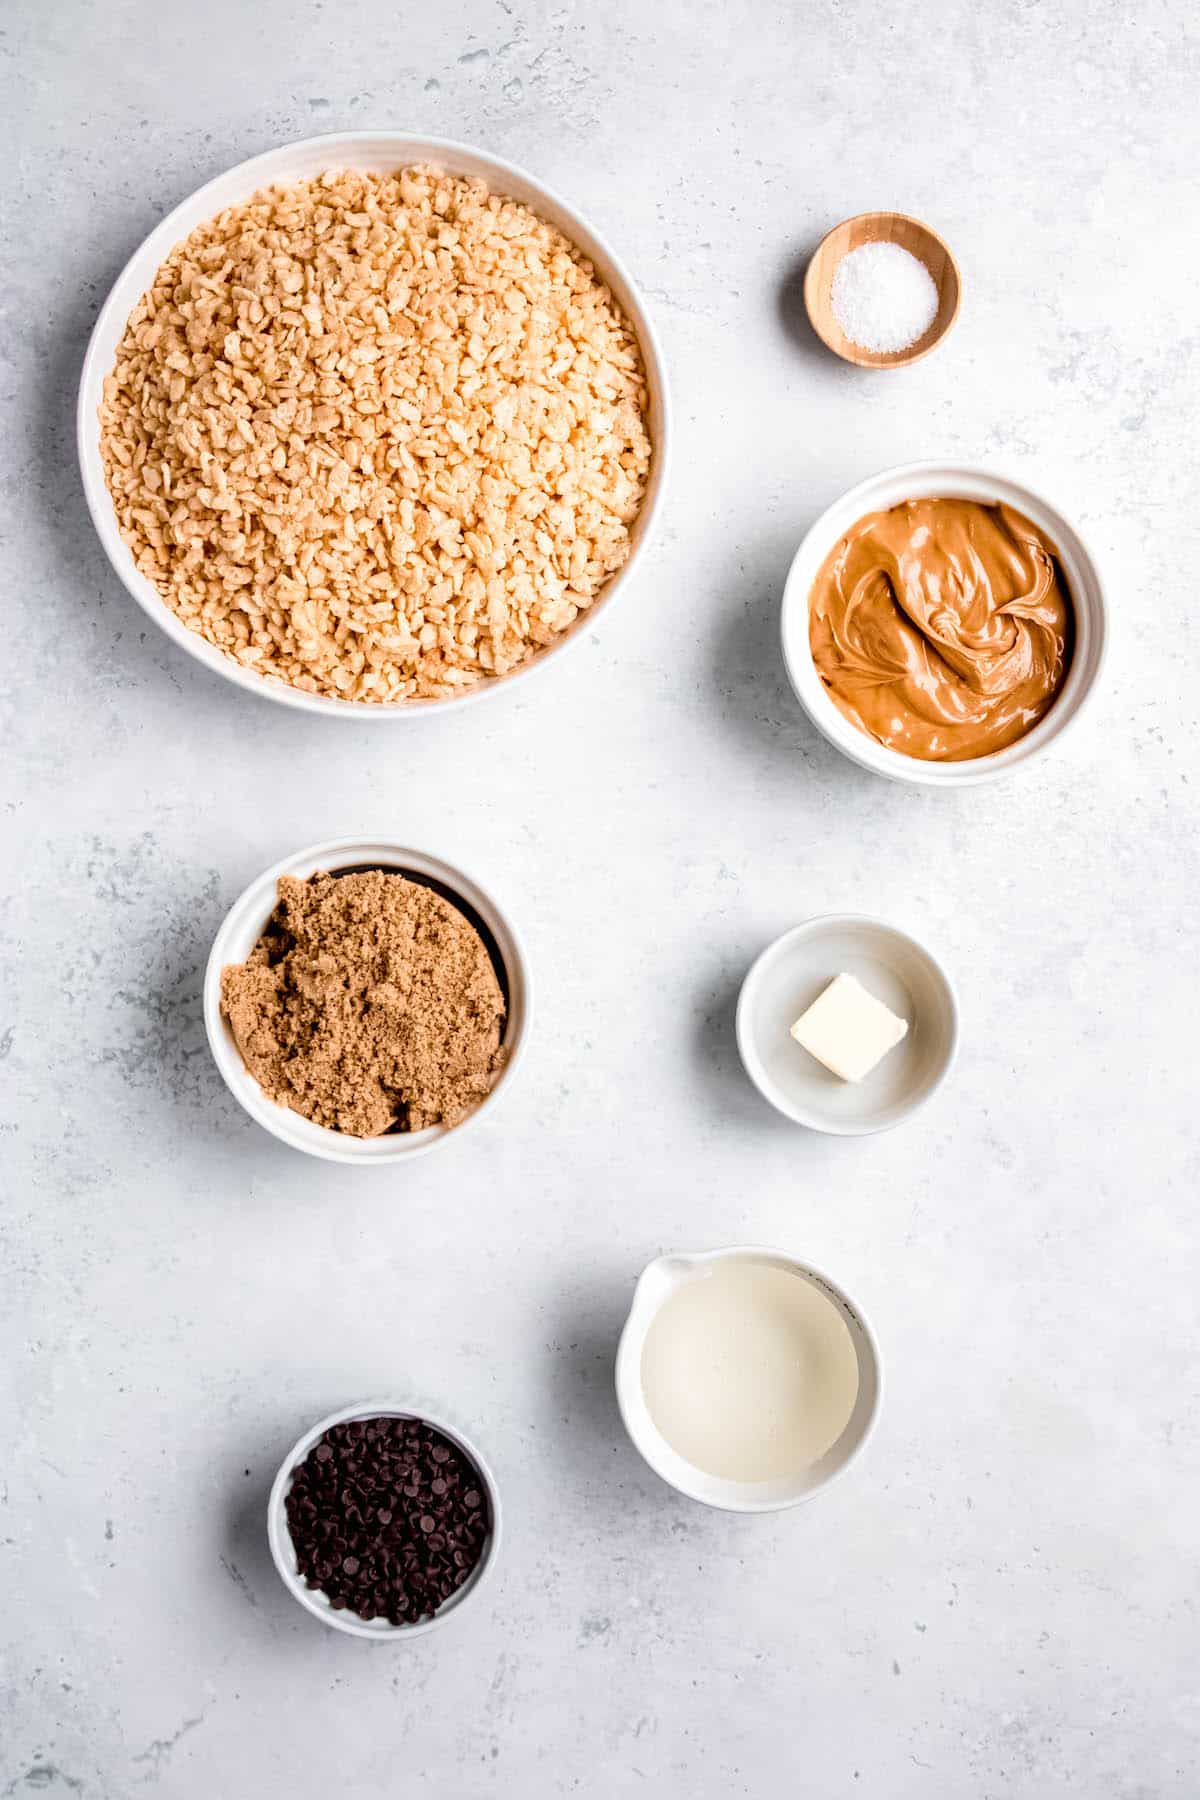 ingredients needed to make peanut butter chocolate chip rice krispies treats measured out into bowls on a white table.